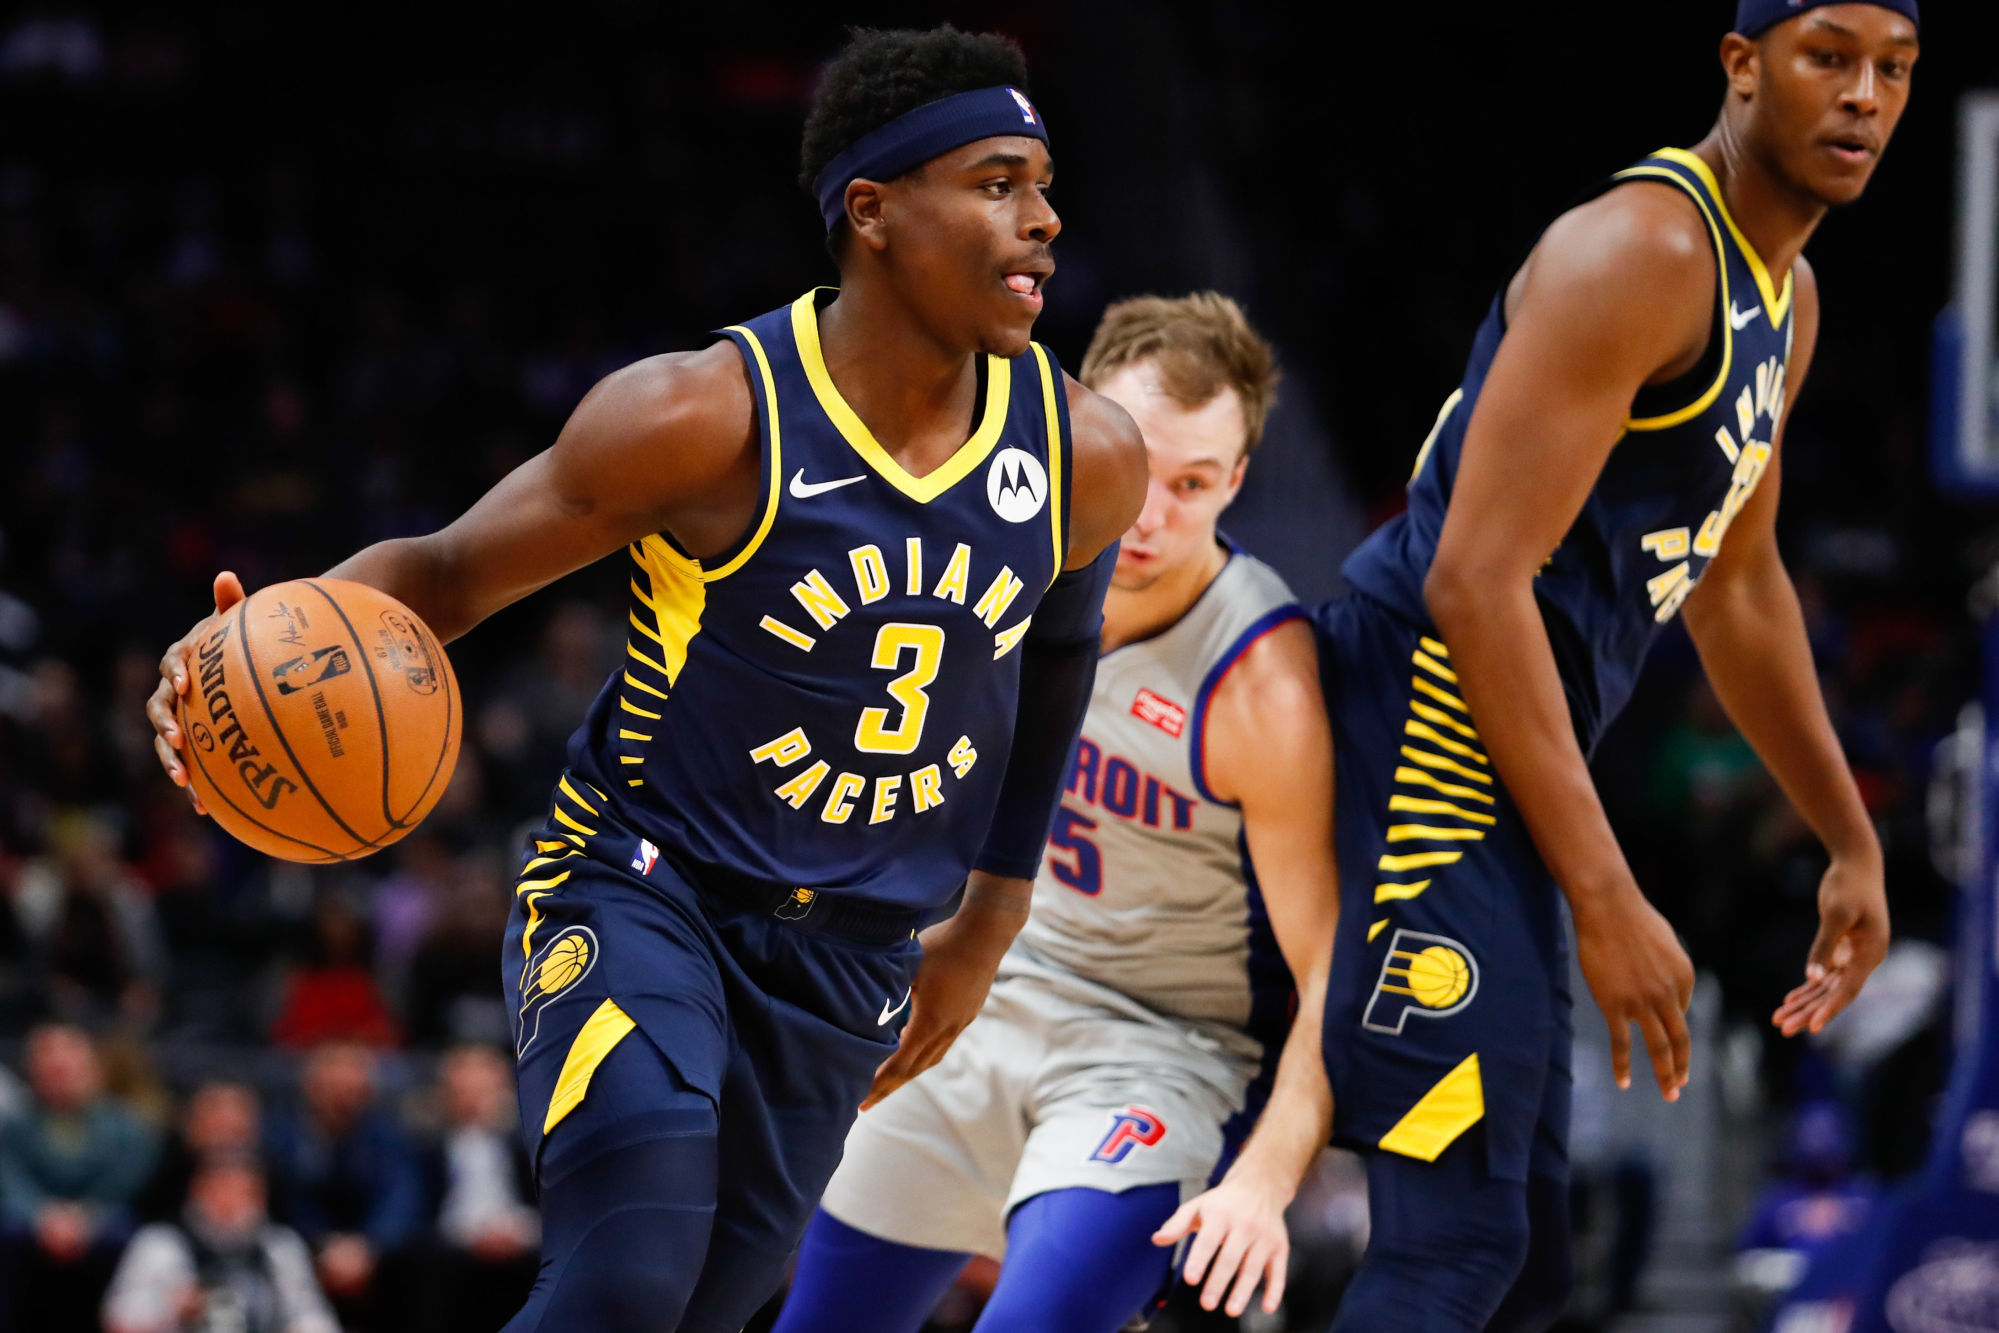 Dec 6, 2019; Detroit, MI, USA; Indiana Pacers guard Aaron Holiday (3) dribbles the ball during the first quarter against the Detroit Pistons at Little Caesars Arena. Mandatory Credit: Raj Mehta-USA TODAY Sports/Sipa USA 

Photo by Icon Sport - Aaron HOLIDAY - Little Caesars Arena - Detroit (Etats Unis)